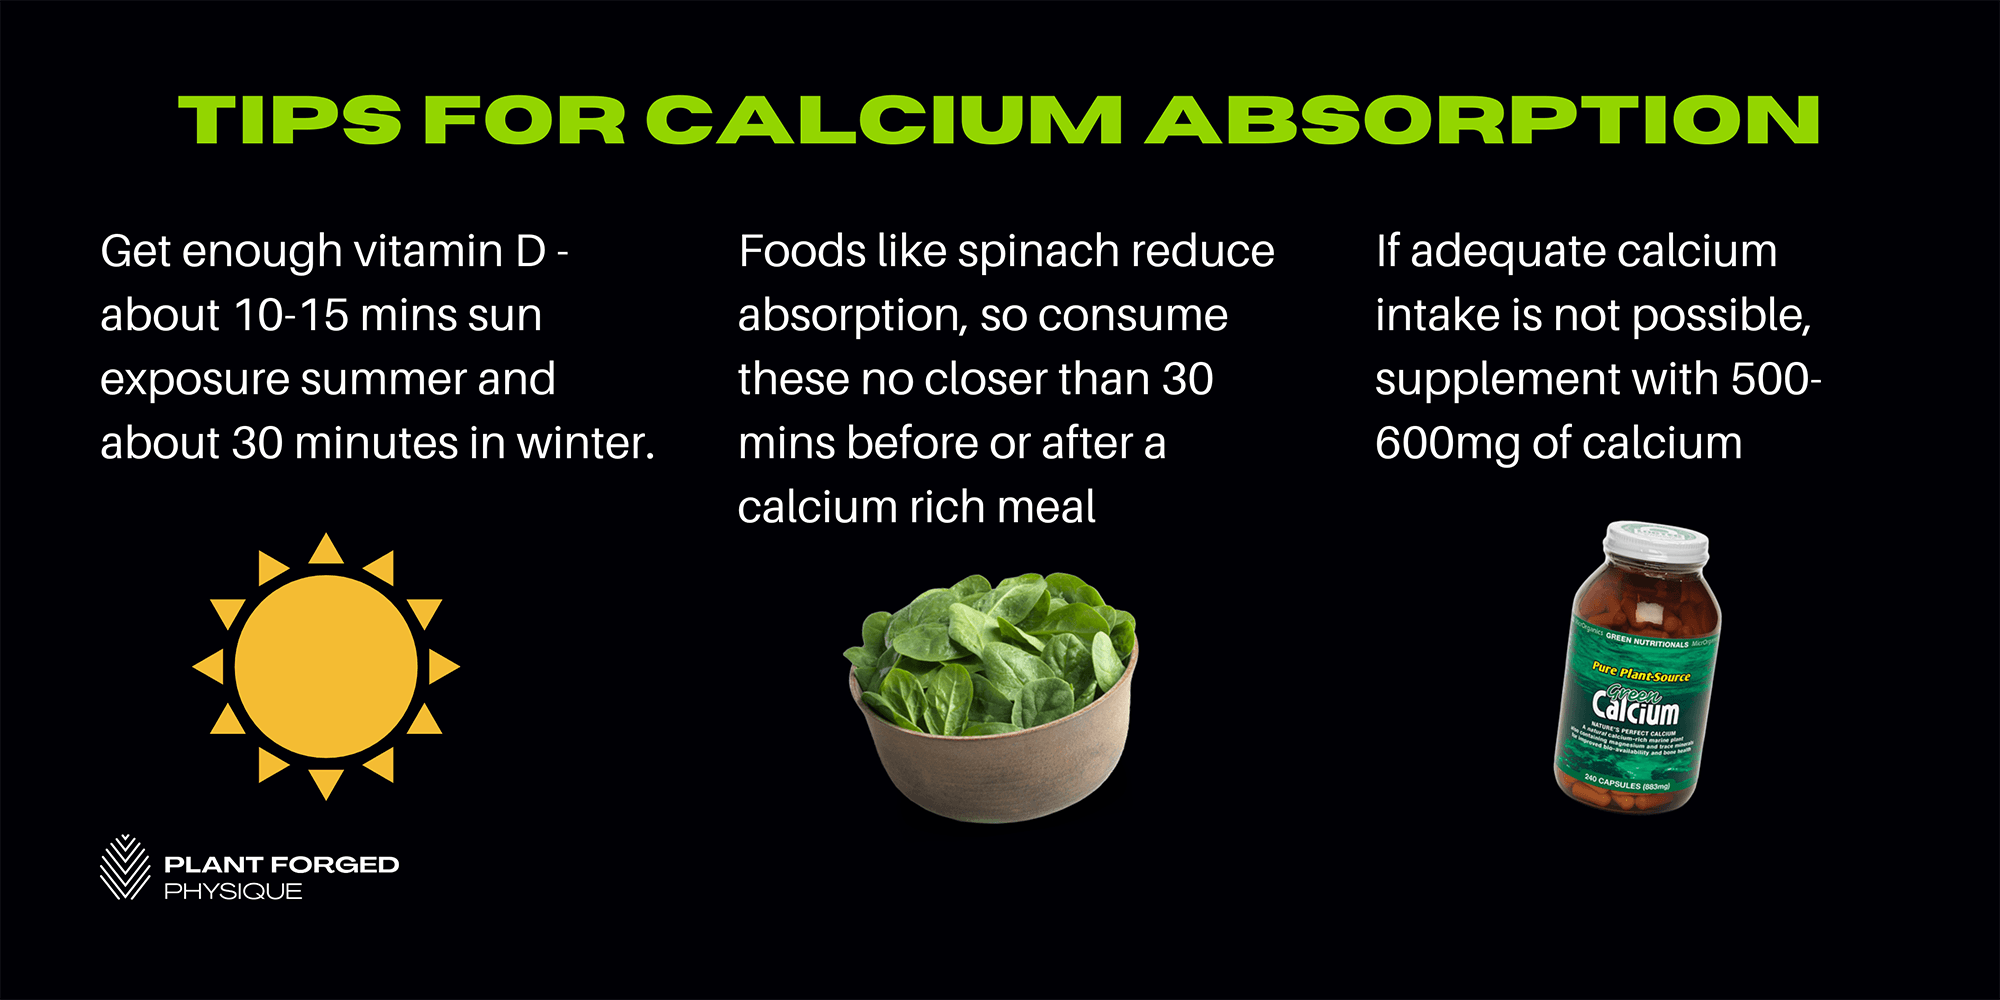 Tips for calcium absorption